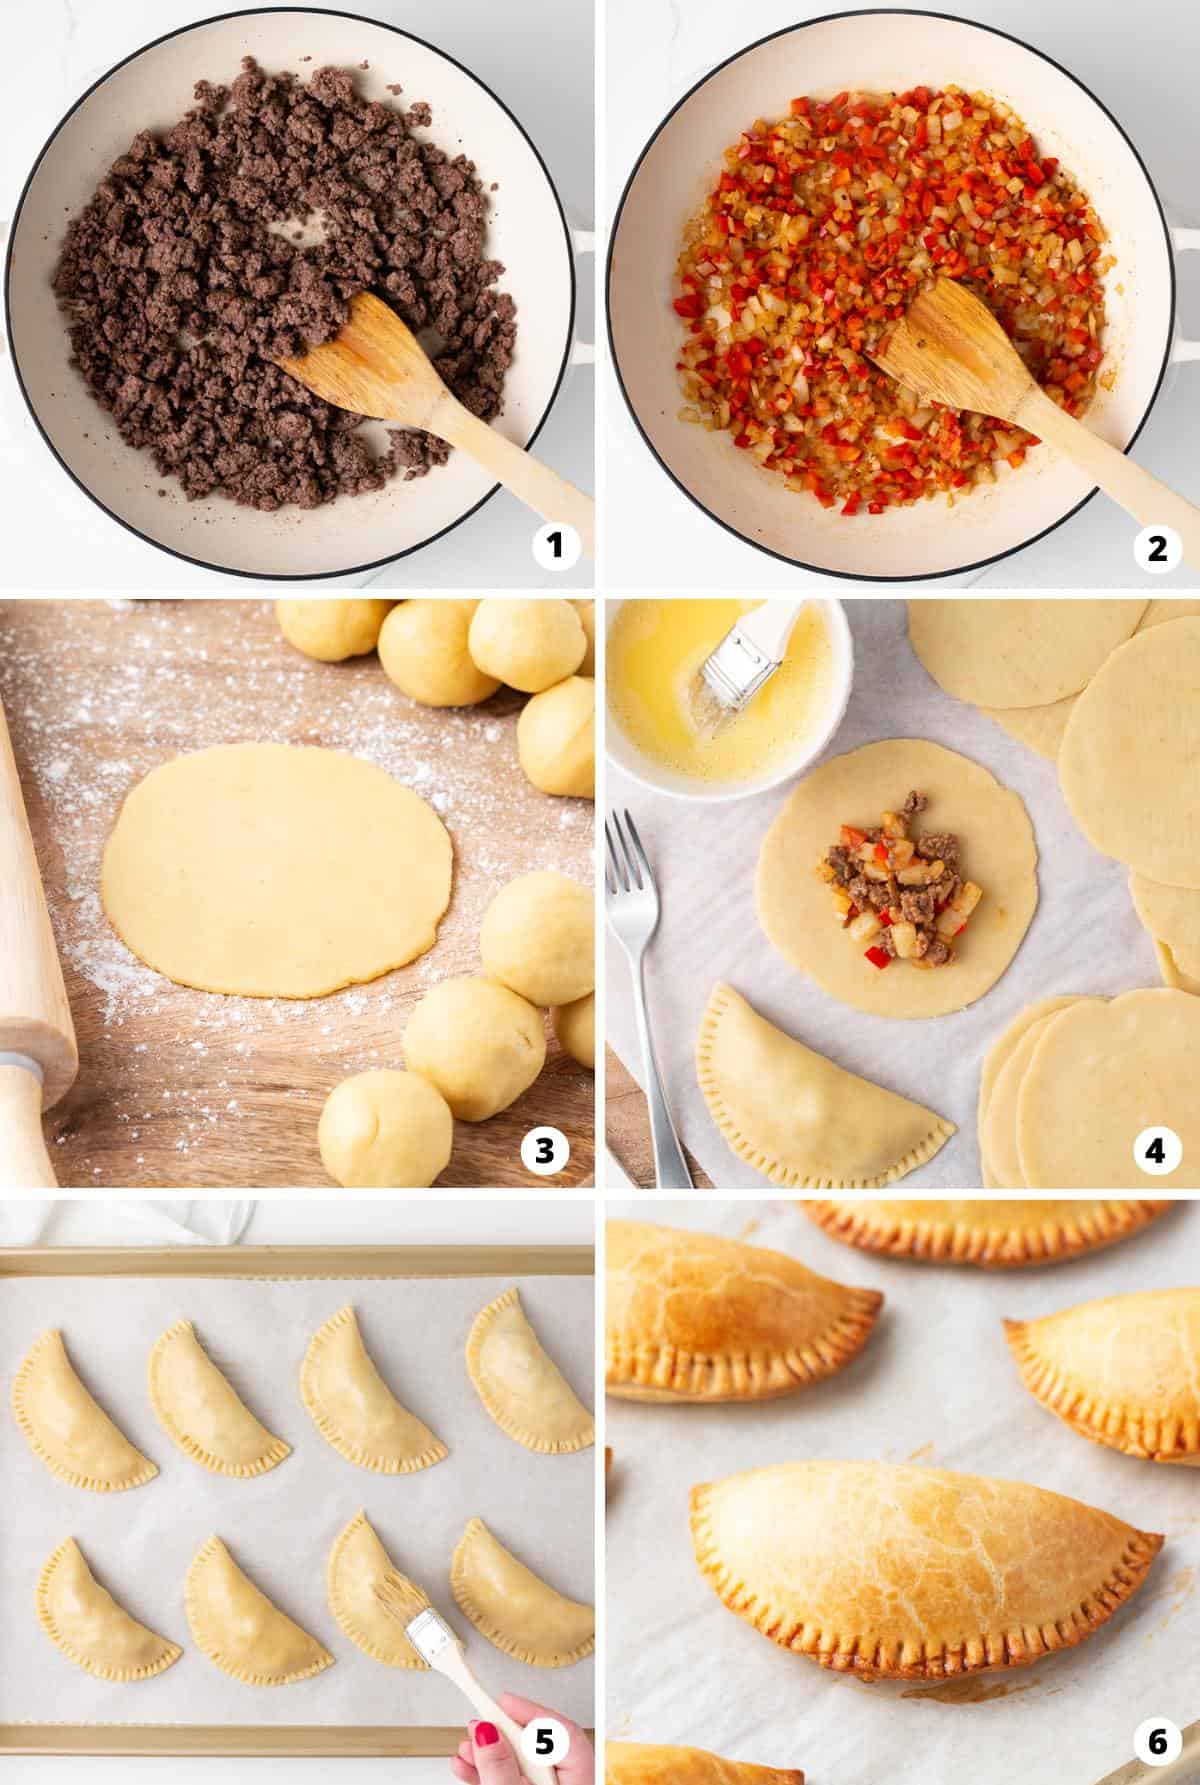 Showing how to make empanadas in a 6 step collage.